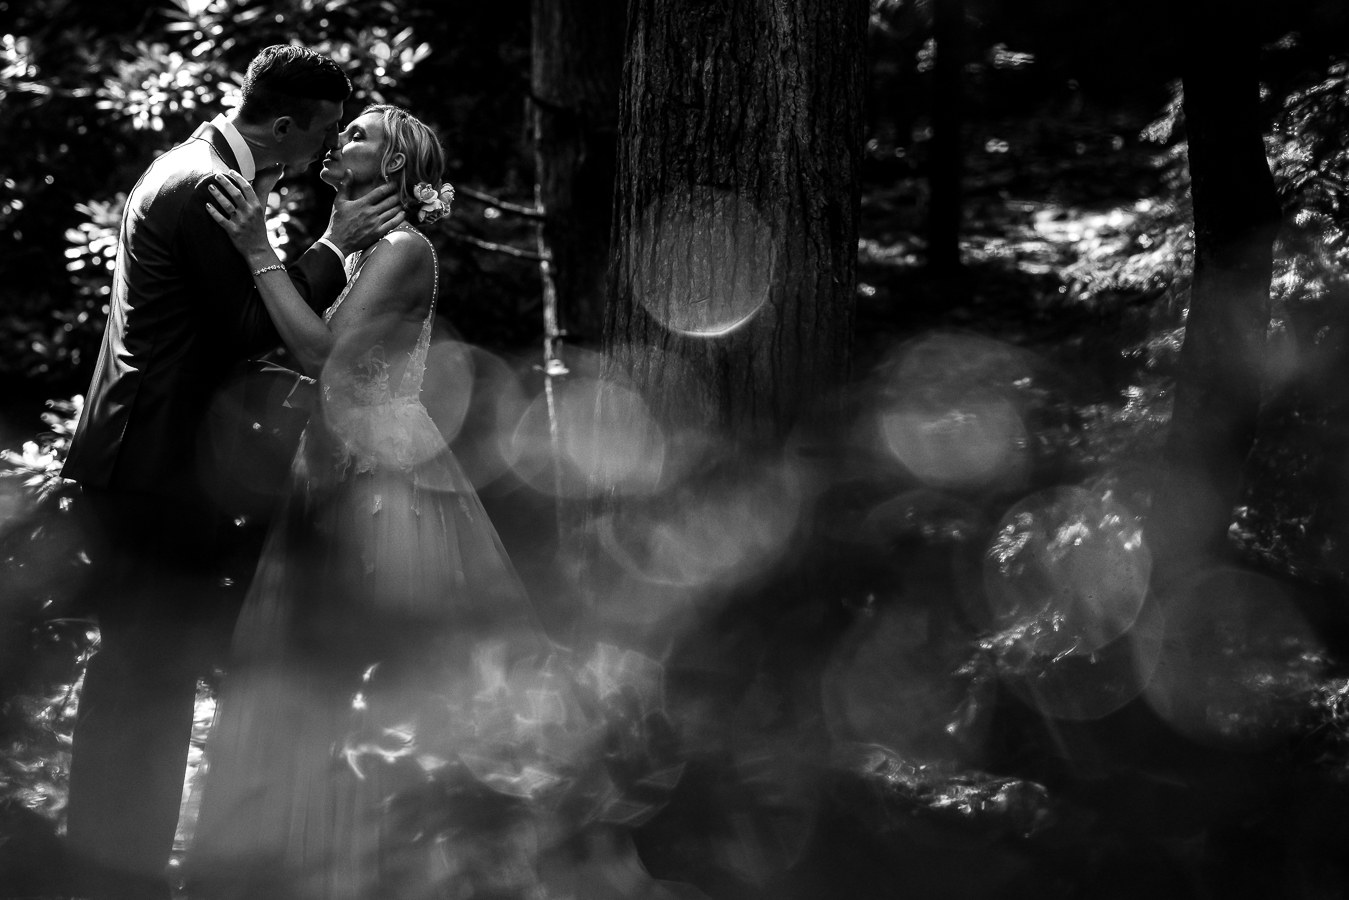 creative wedding photographer, lisa rhinehart, captures this black and white image of the bride and groom kissing one another underneath the trees on the hiking trail in pa 